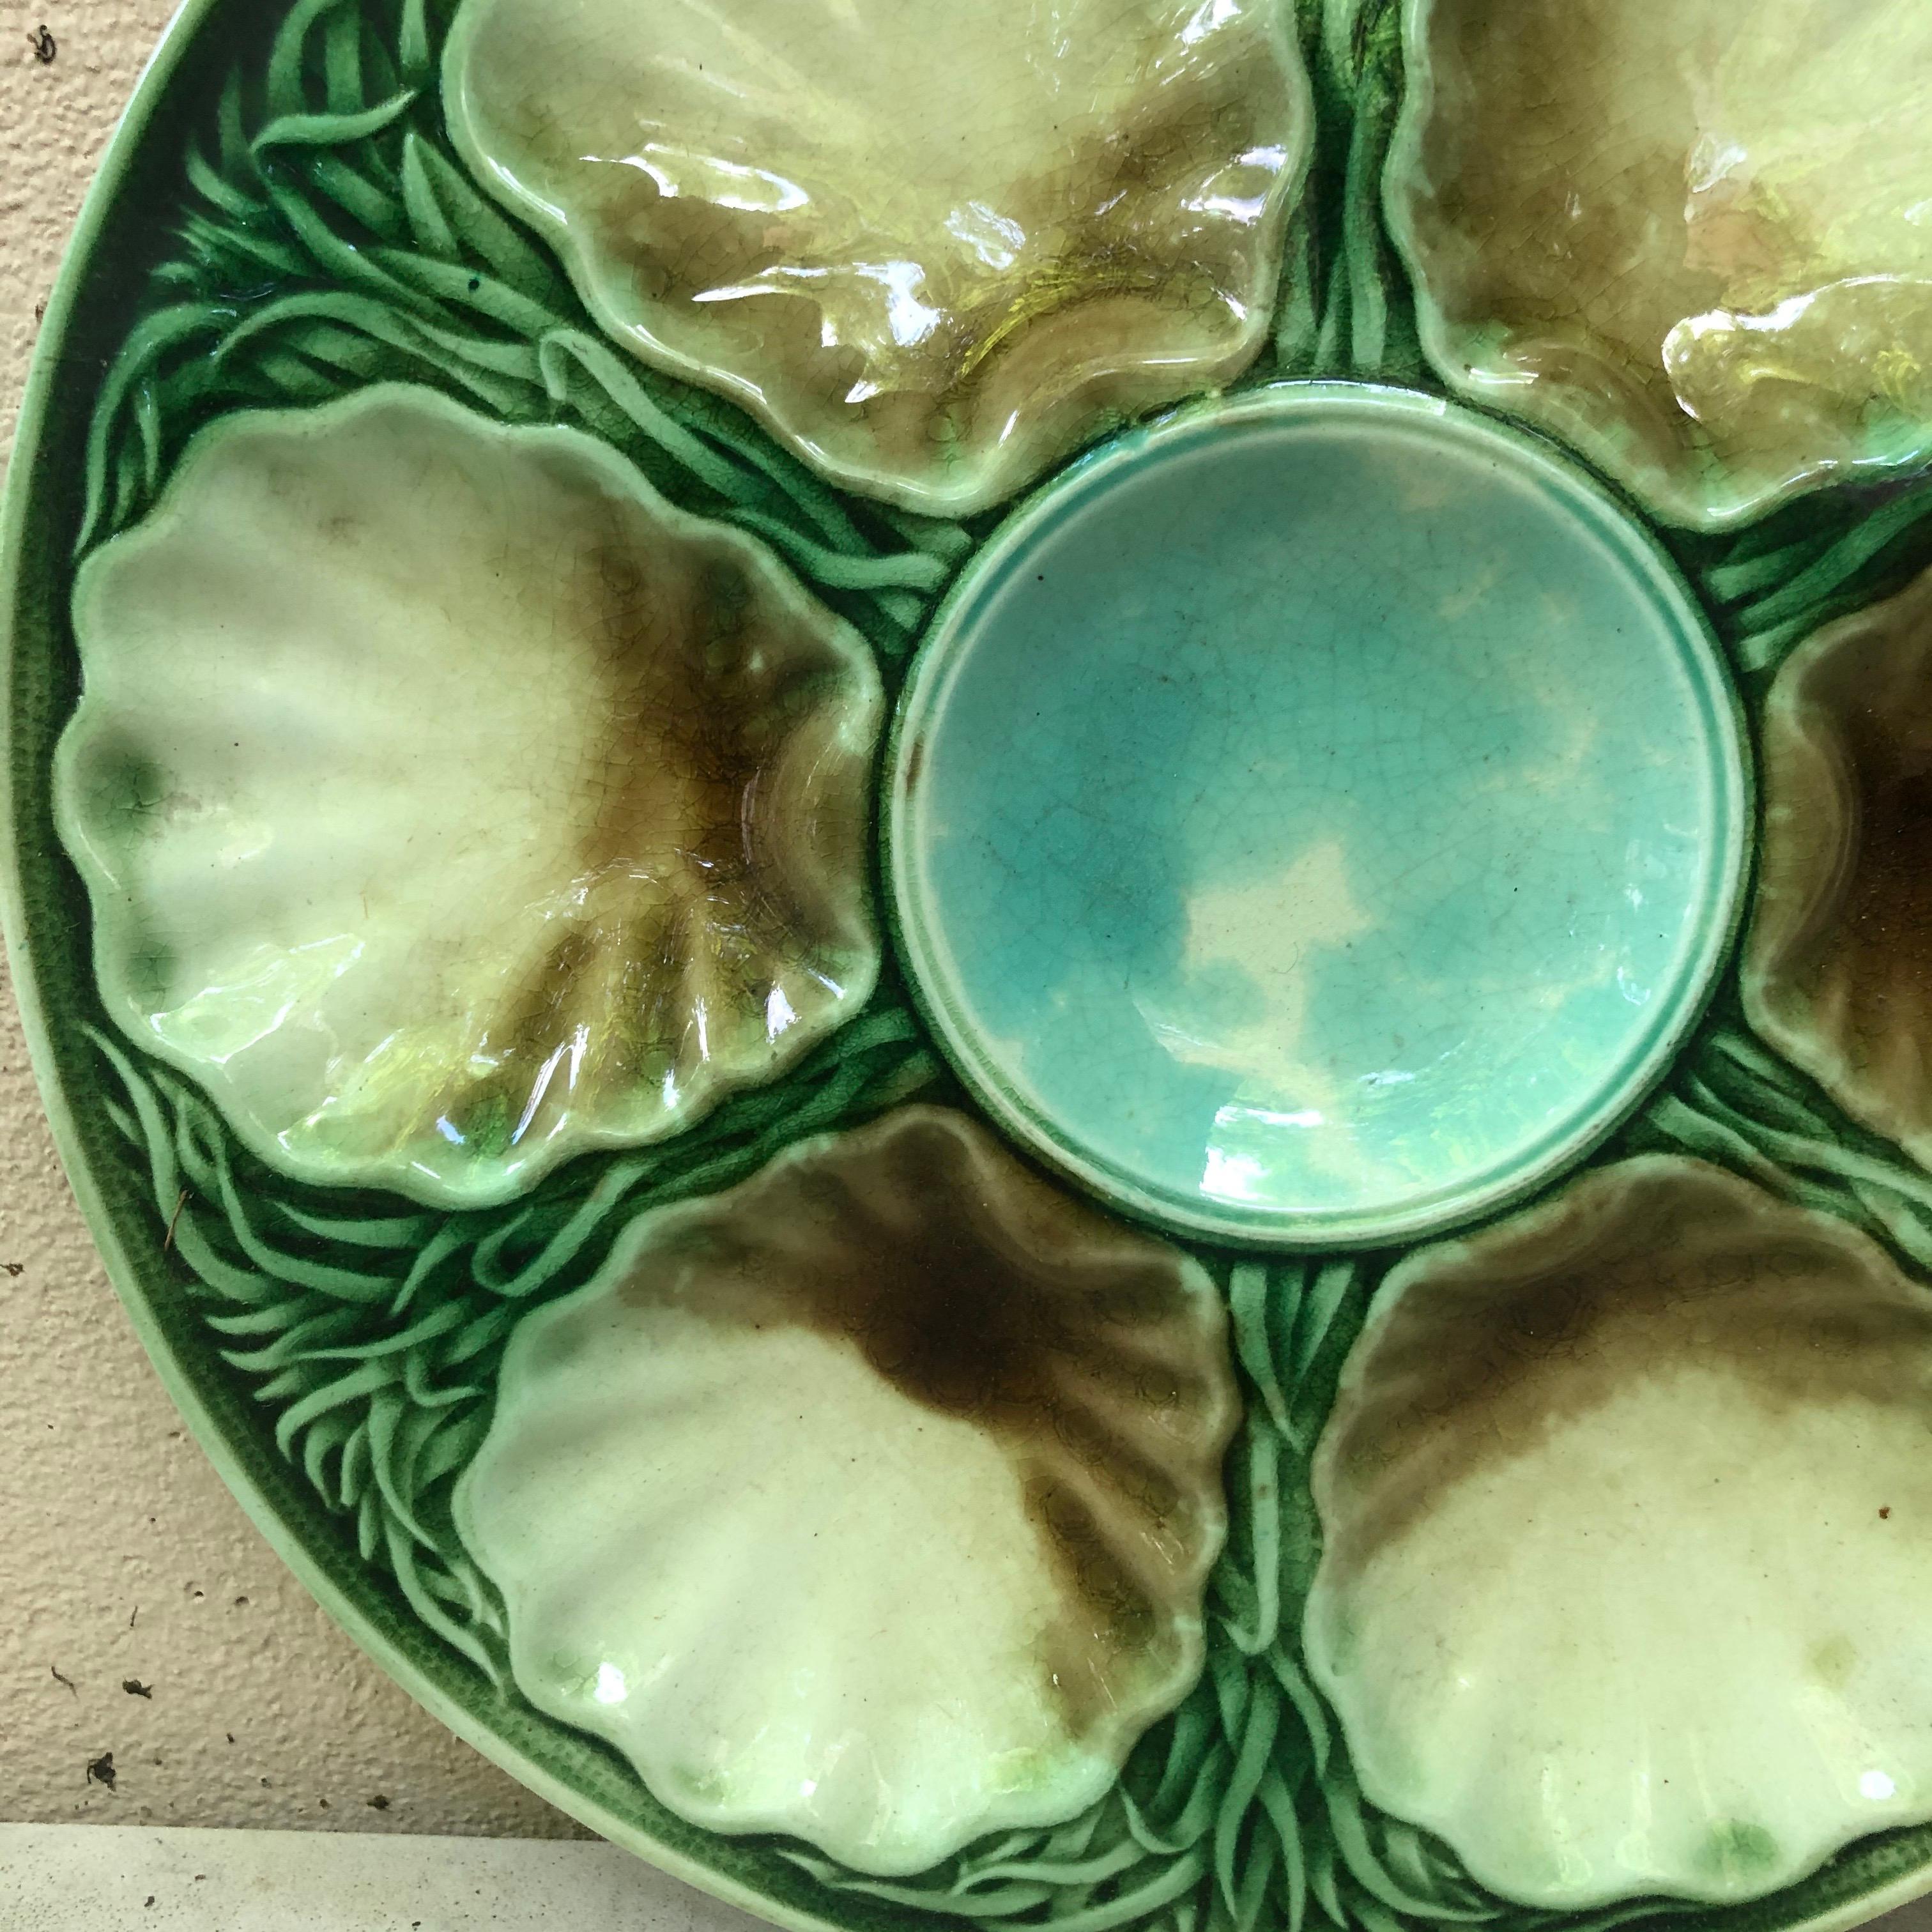 French Majolica oyster plate with seaweeds signed Salins (East of France) circa 1890.